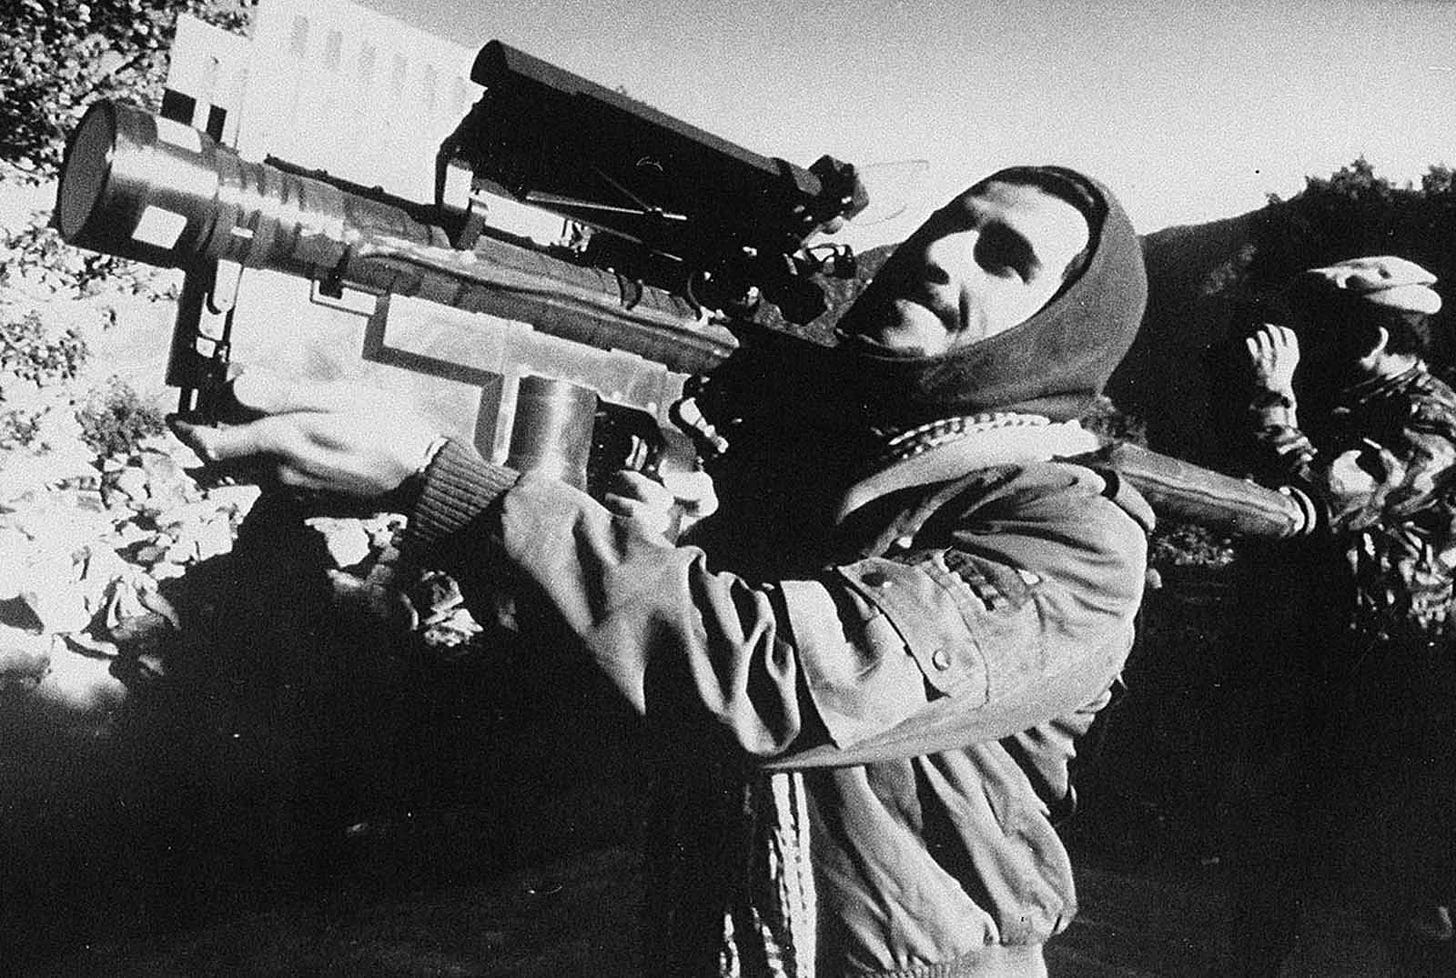 An Afghan guerrilla handles a U.S.-made Stinger anti-aircraft missile in this photo made between November 1987 and January 1988. The shoulder-fired, heat-seeking missile supplied to the Afghan resistance by the CIA during the Soviet invasion of Afghanistan, is capable of bringing down low-flying planes and helicopters. At one point, late in the war, rebels were reportedly downing nearly one Soviet aircraft every day with Stinger missiles.